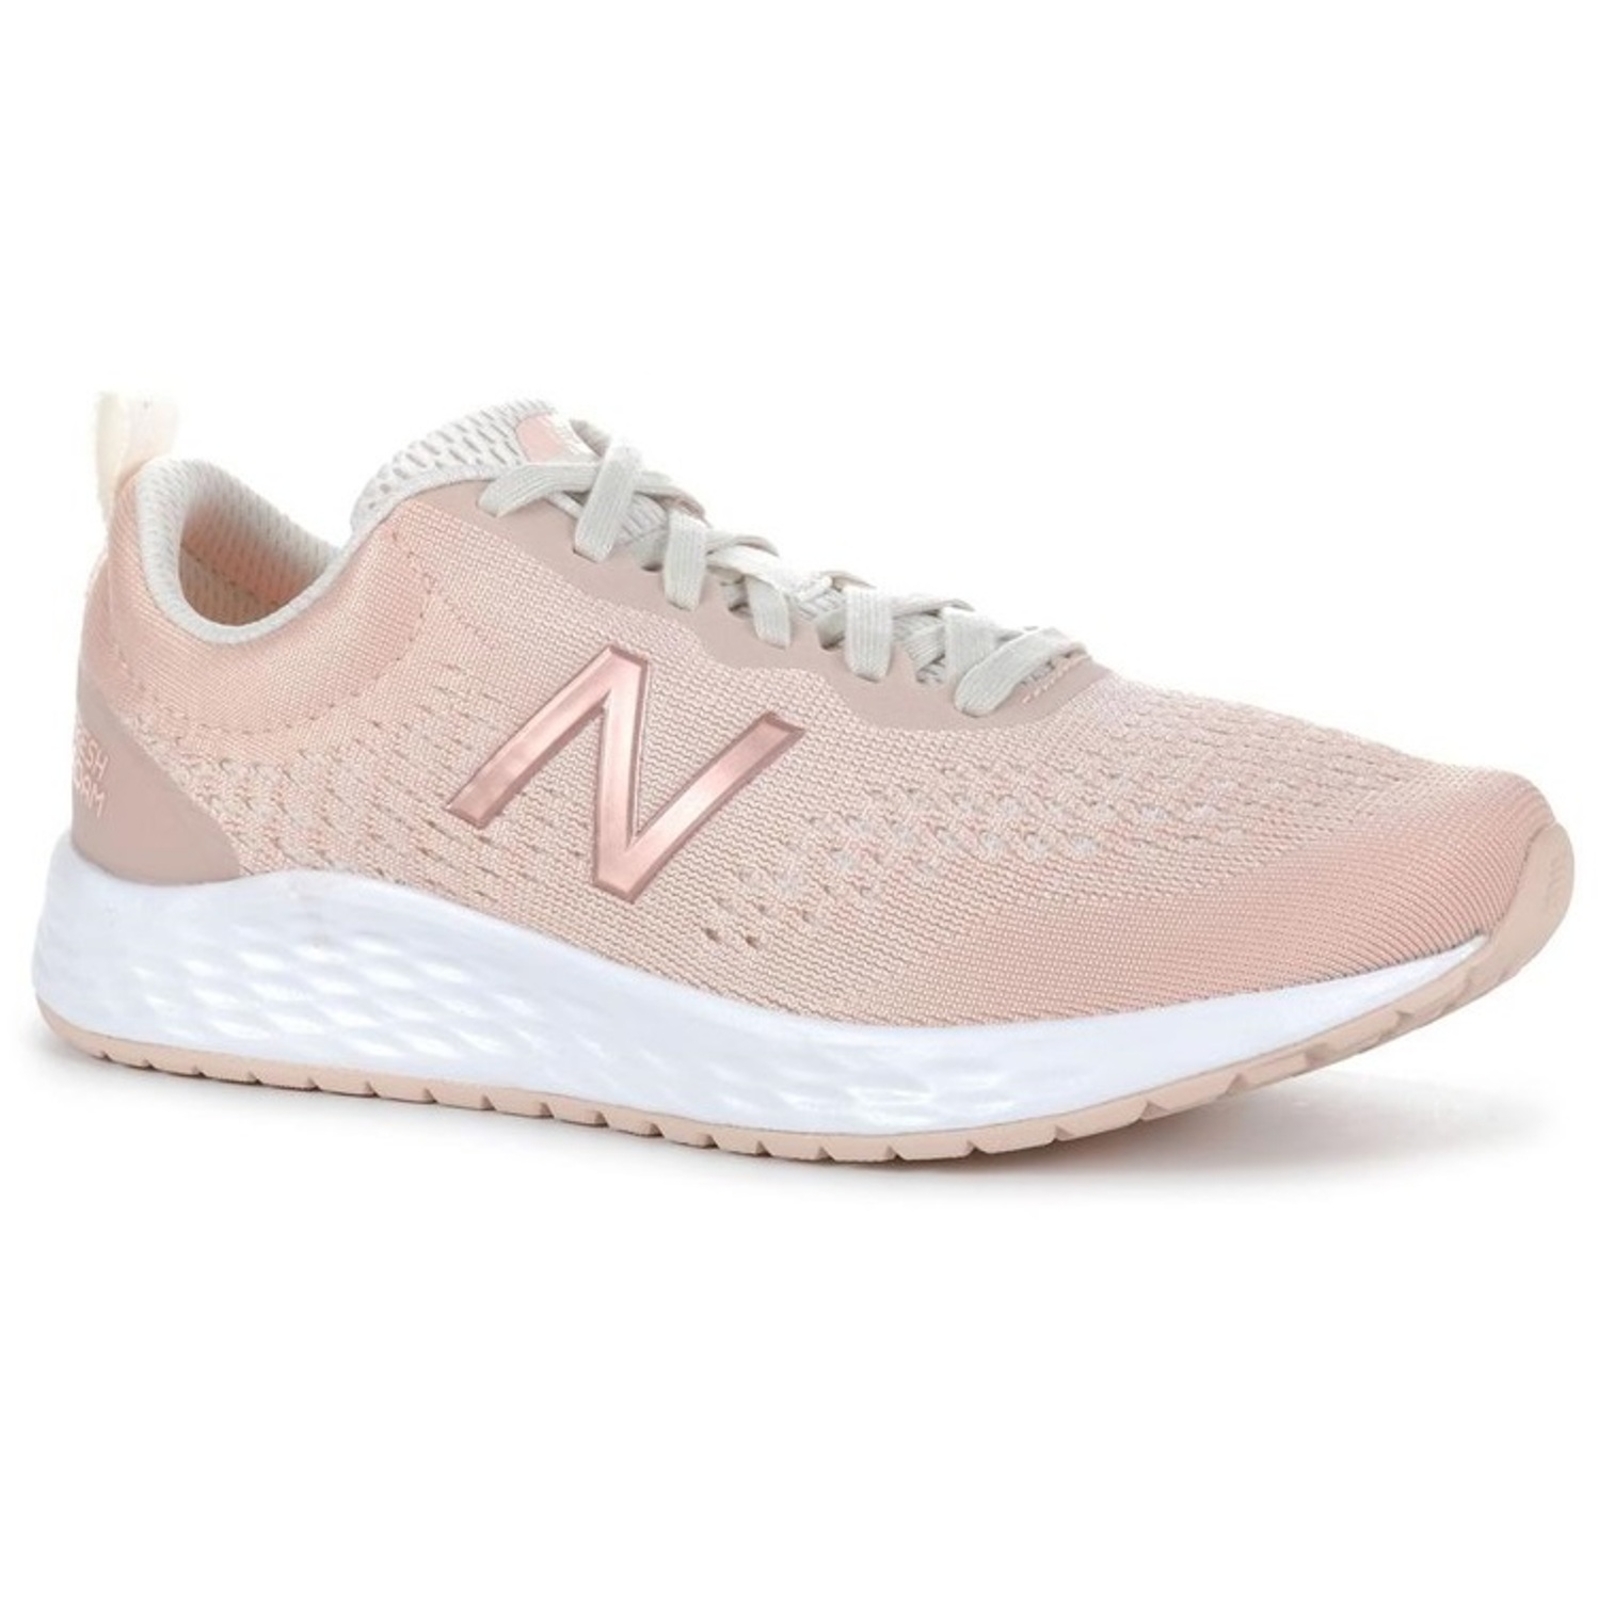 Wide Womens Running Shoes: Pink Rose 